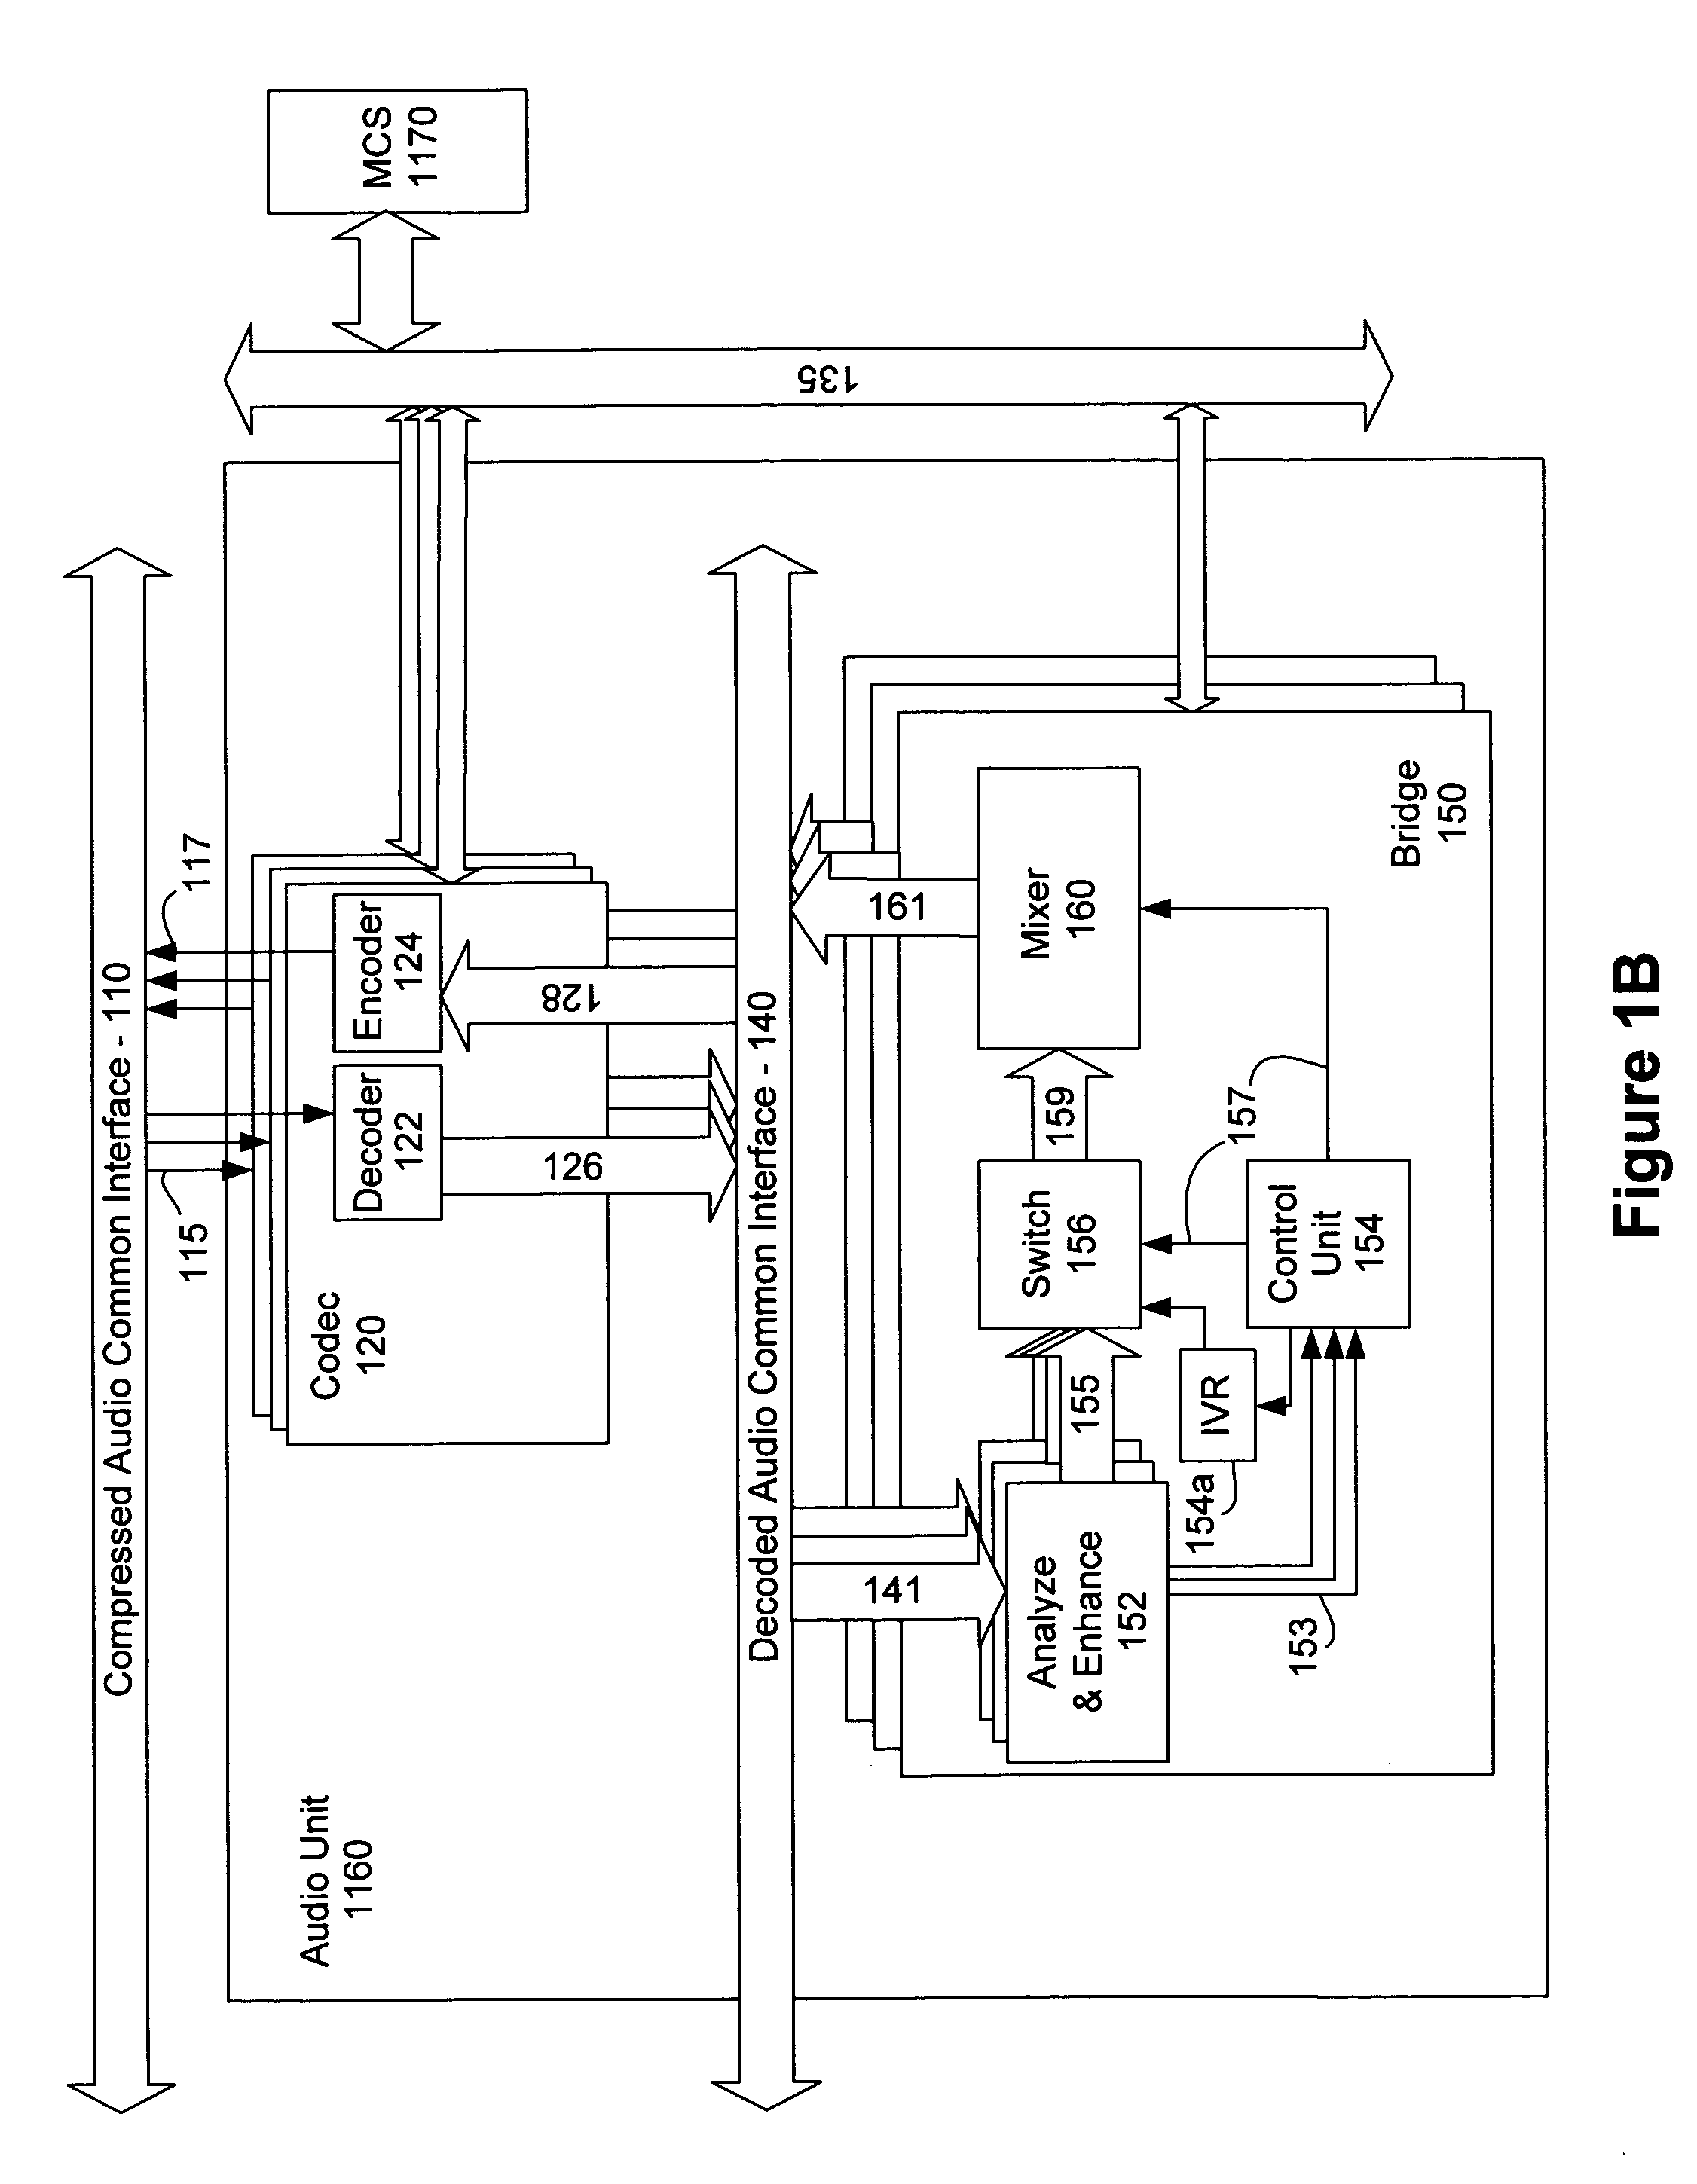 Method and apparatus for improving nuisance signals in audio/video conference